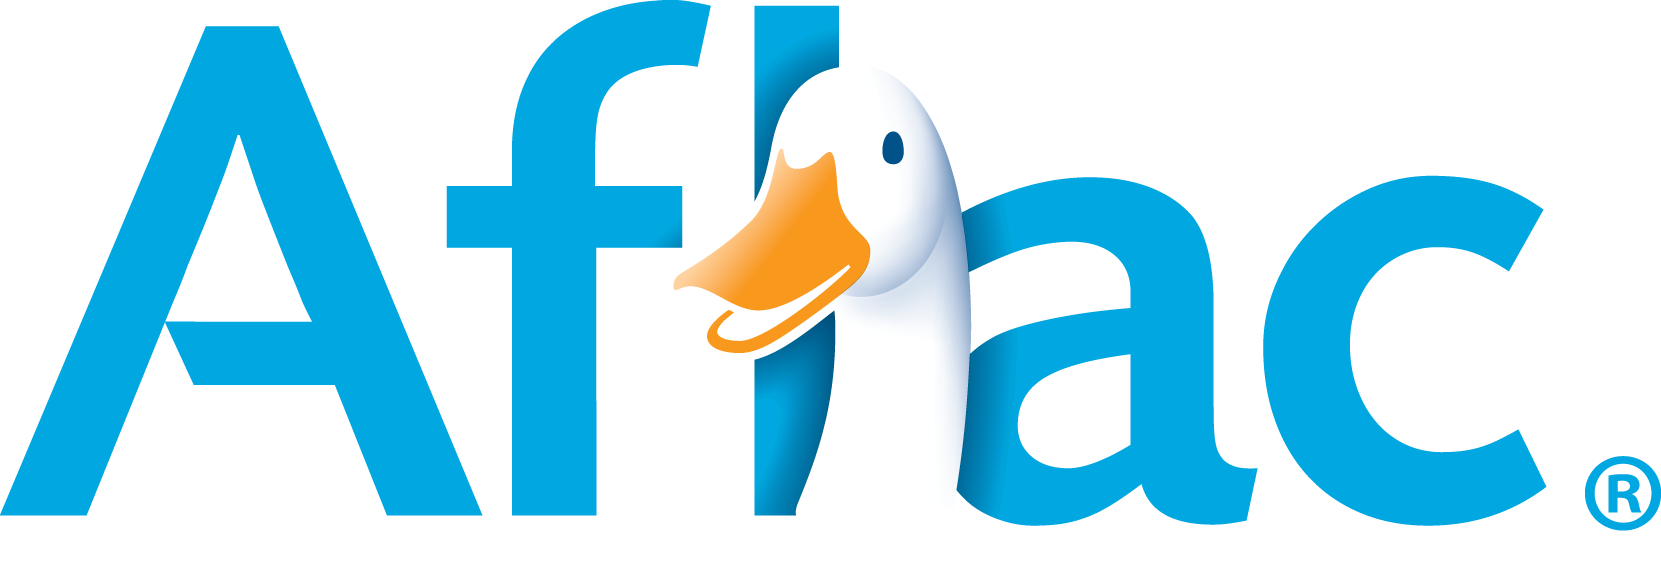 Aflac (Silver)